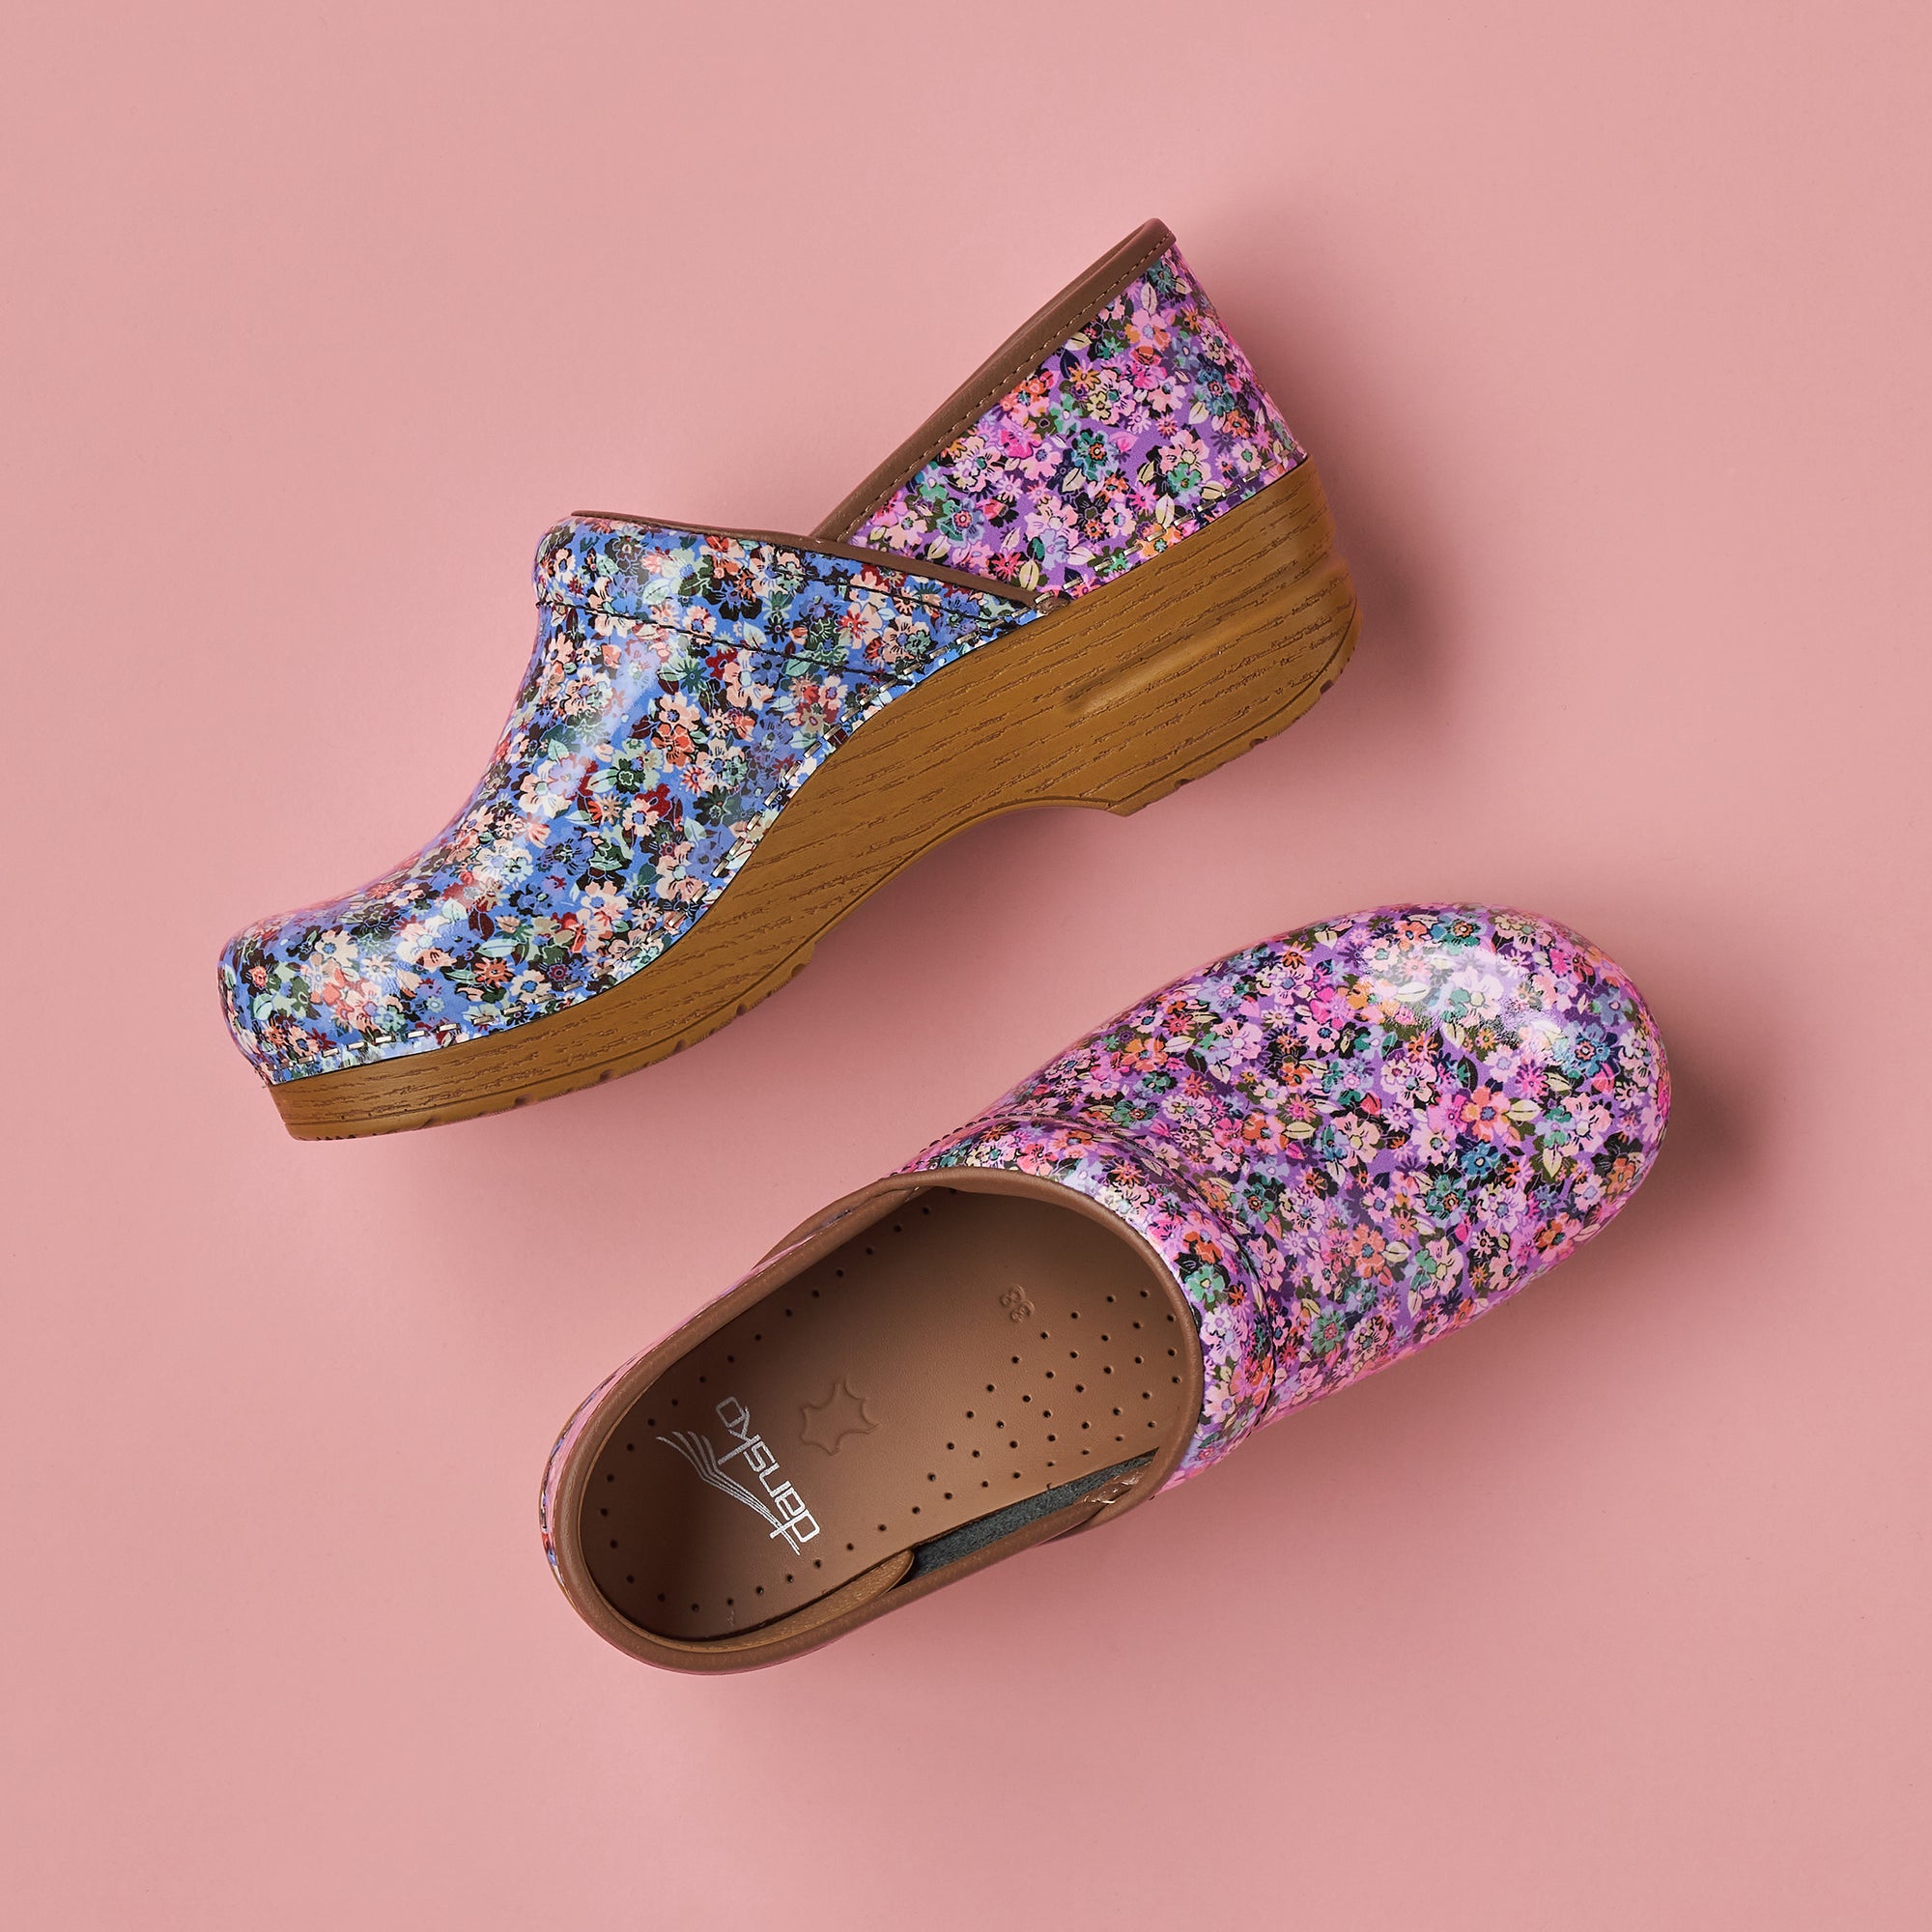 Mismatched floral print clogs shown on a light pink background.